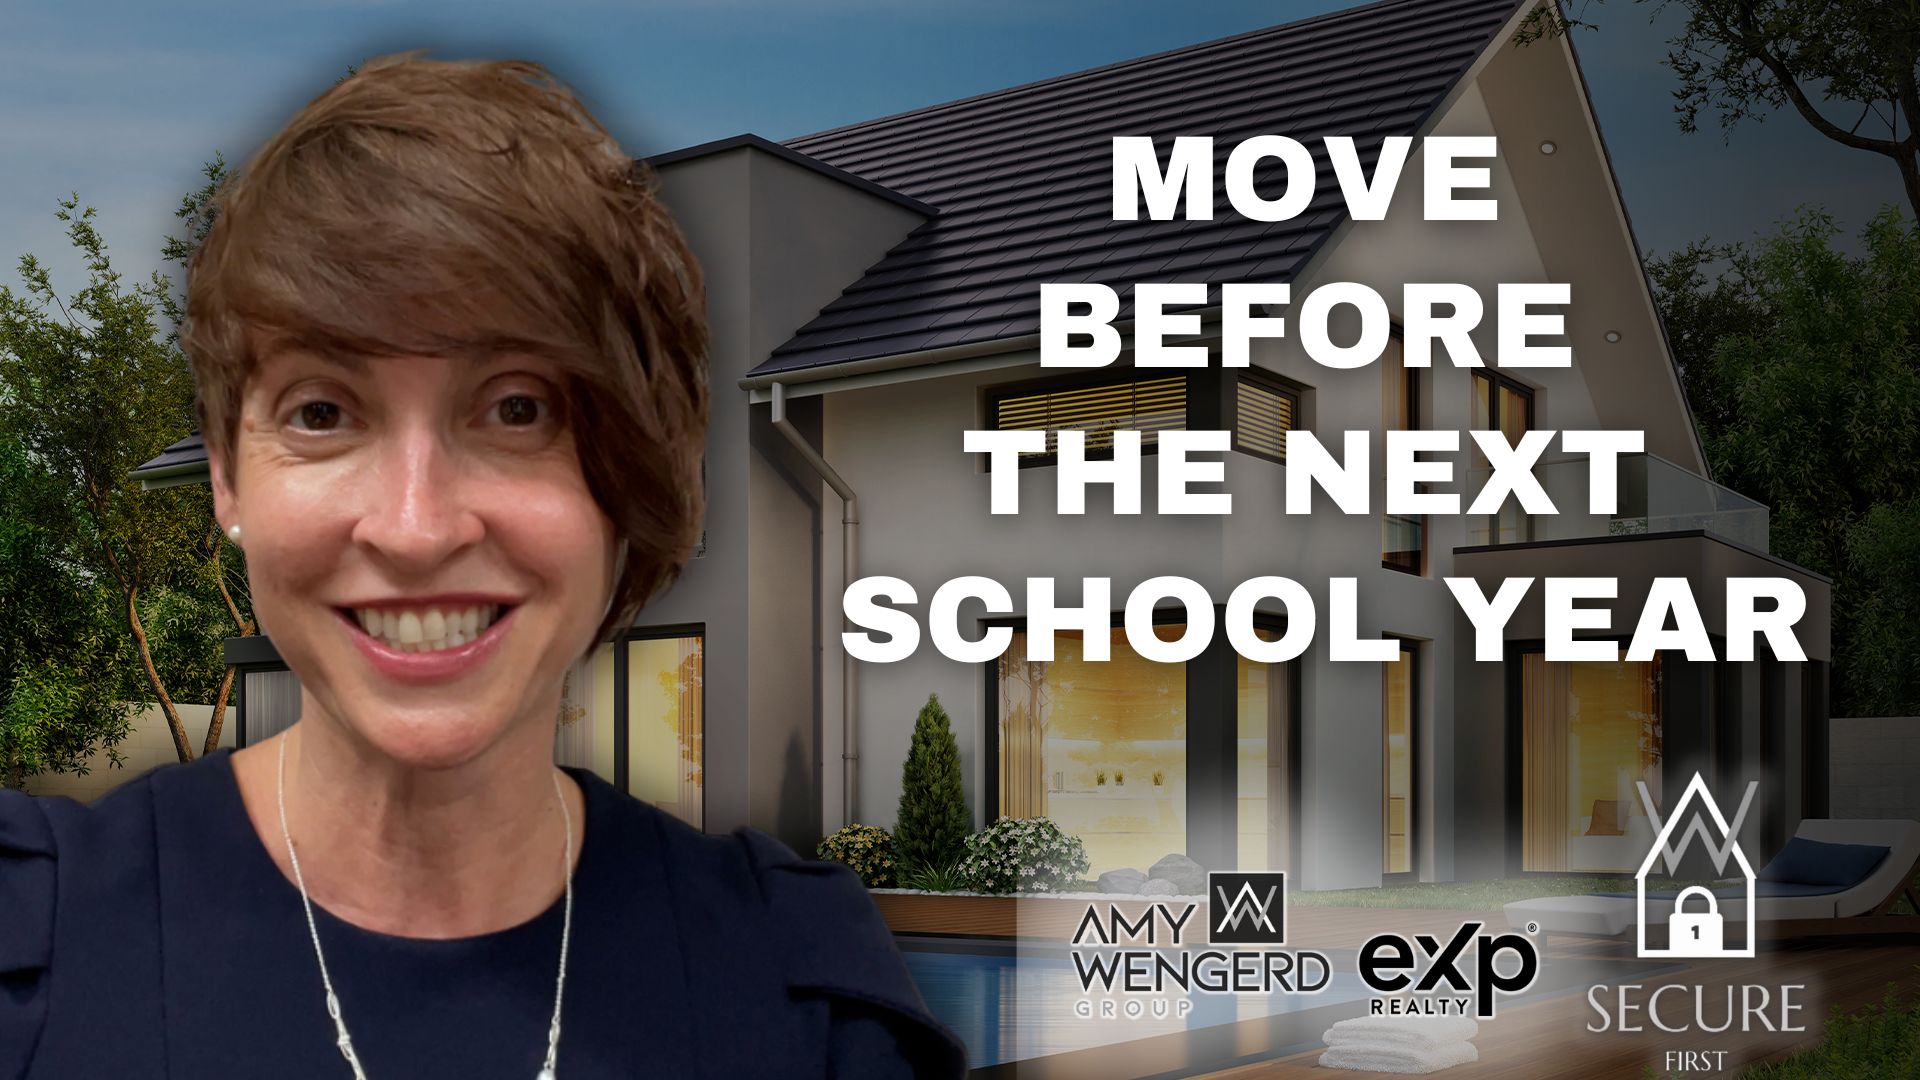 Summer’s Here! Plan Your Move Before the Next School Year